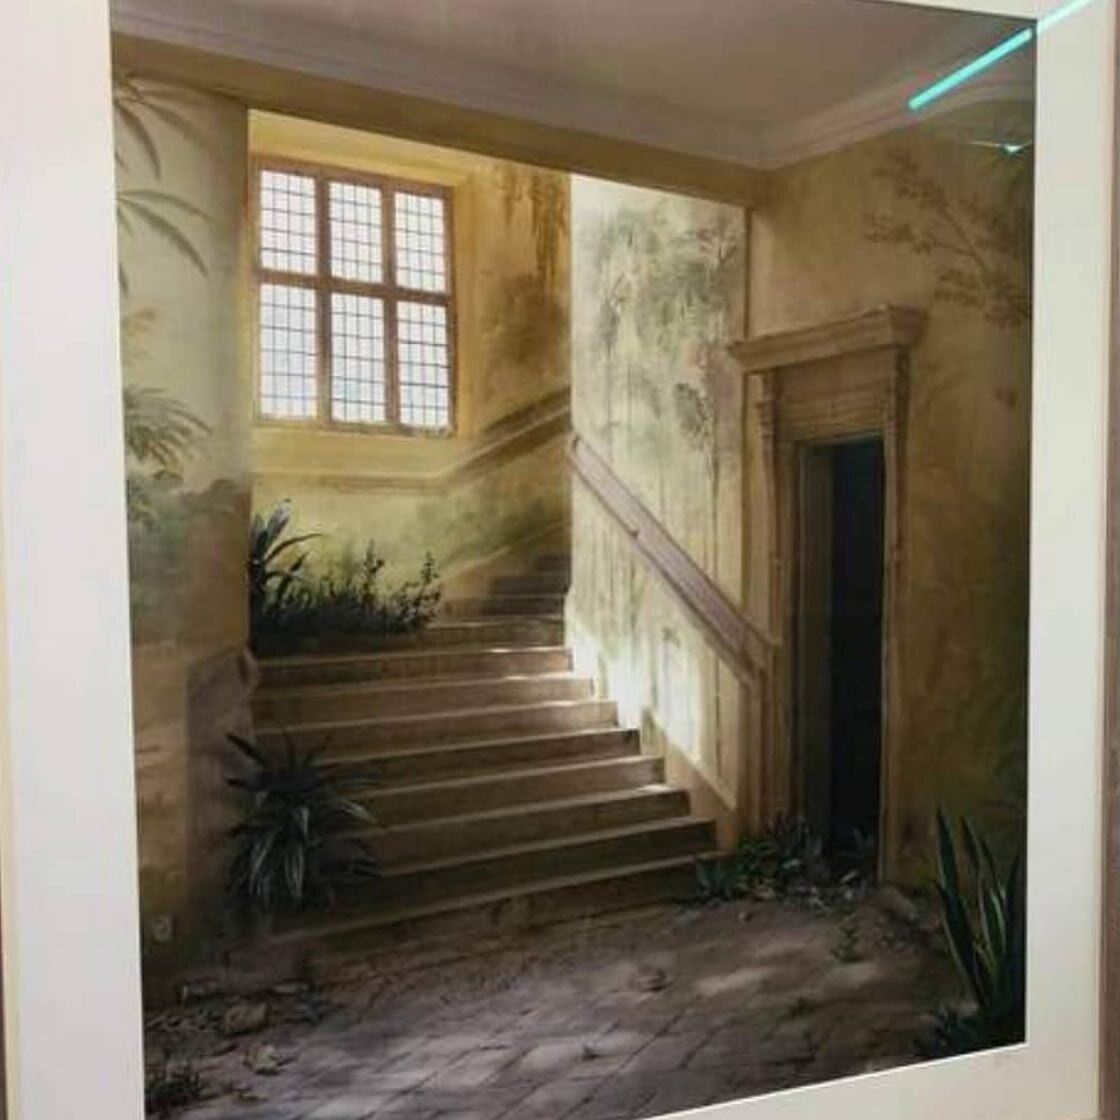 Art Advising on another project that&rsquo;s about to open soon in Bath. More news to follow, but the extraordinarily talented artist Suzanne Moxhay, dropped off six of her ethereal photographs for it. 

It&rsquo;s pure joy to not only finally meet o